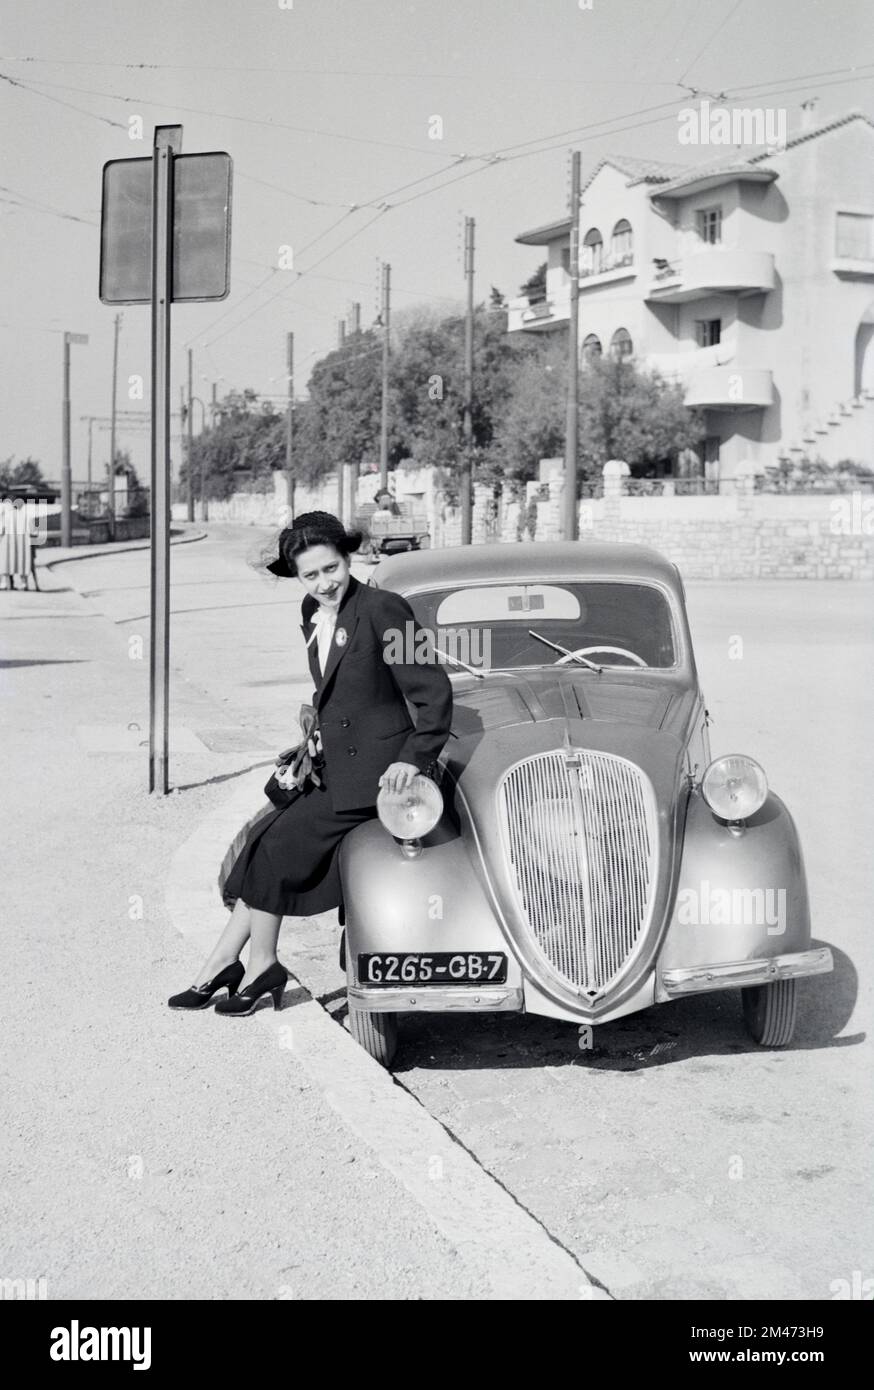 Young French Woman Poses on Vintage Simca 5 2-door Saloon Car Produced in Nanterre France between 1836 and 1948. The Franco-Italian car was identical to the Fiat 500 Topolina. Photographed in Toulon in 1950 Stock Photo